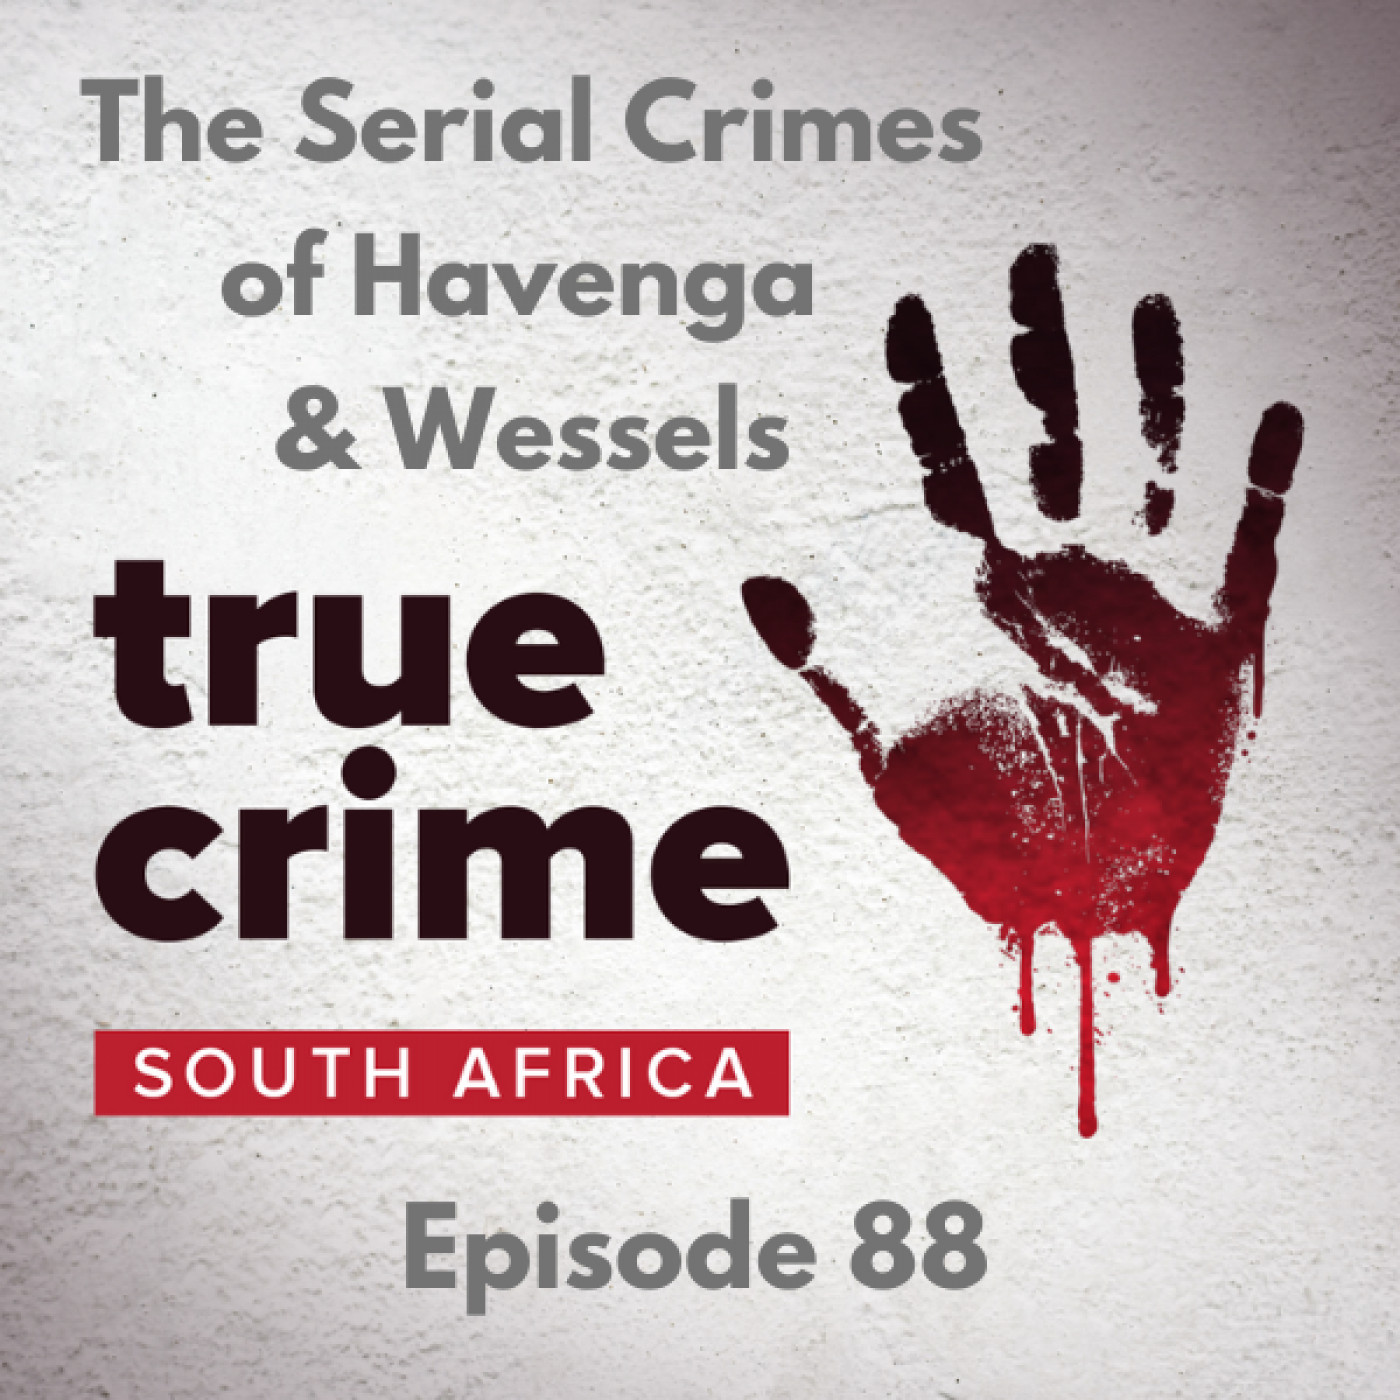 Episode 88 - The Serial Crimes of Havenga & Wessels